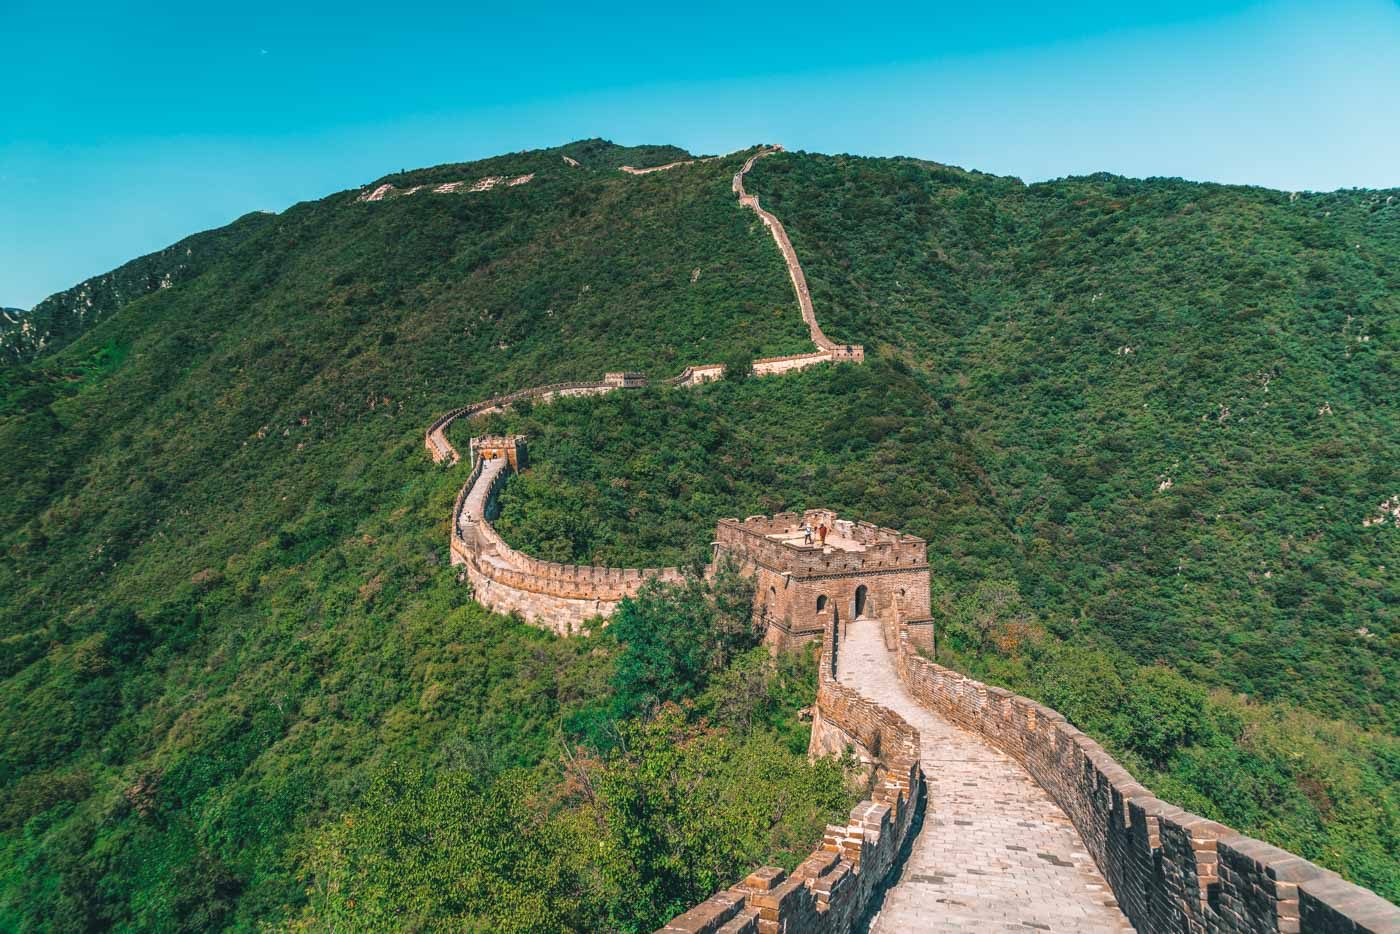 Beautiful places in China: The Great Wall of China